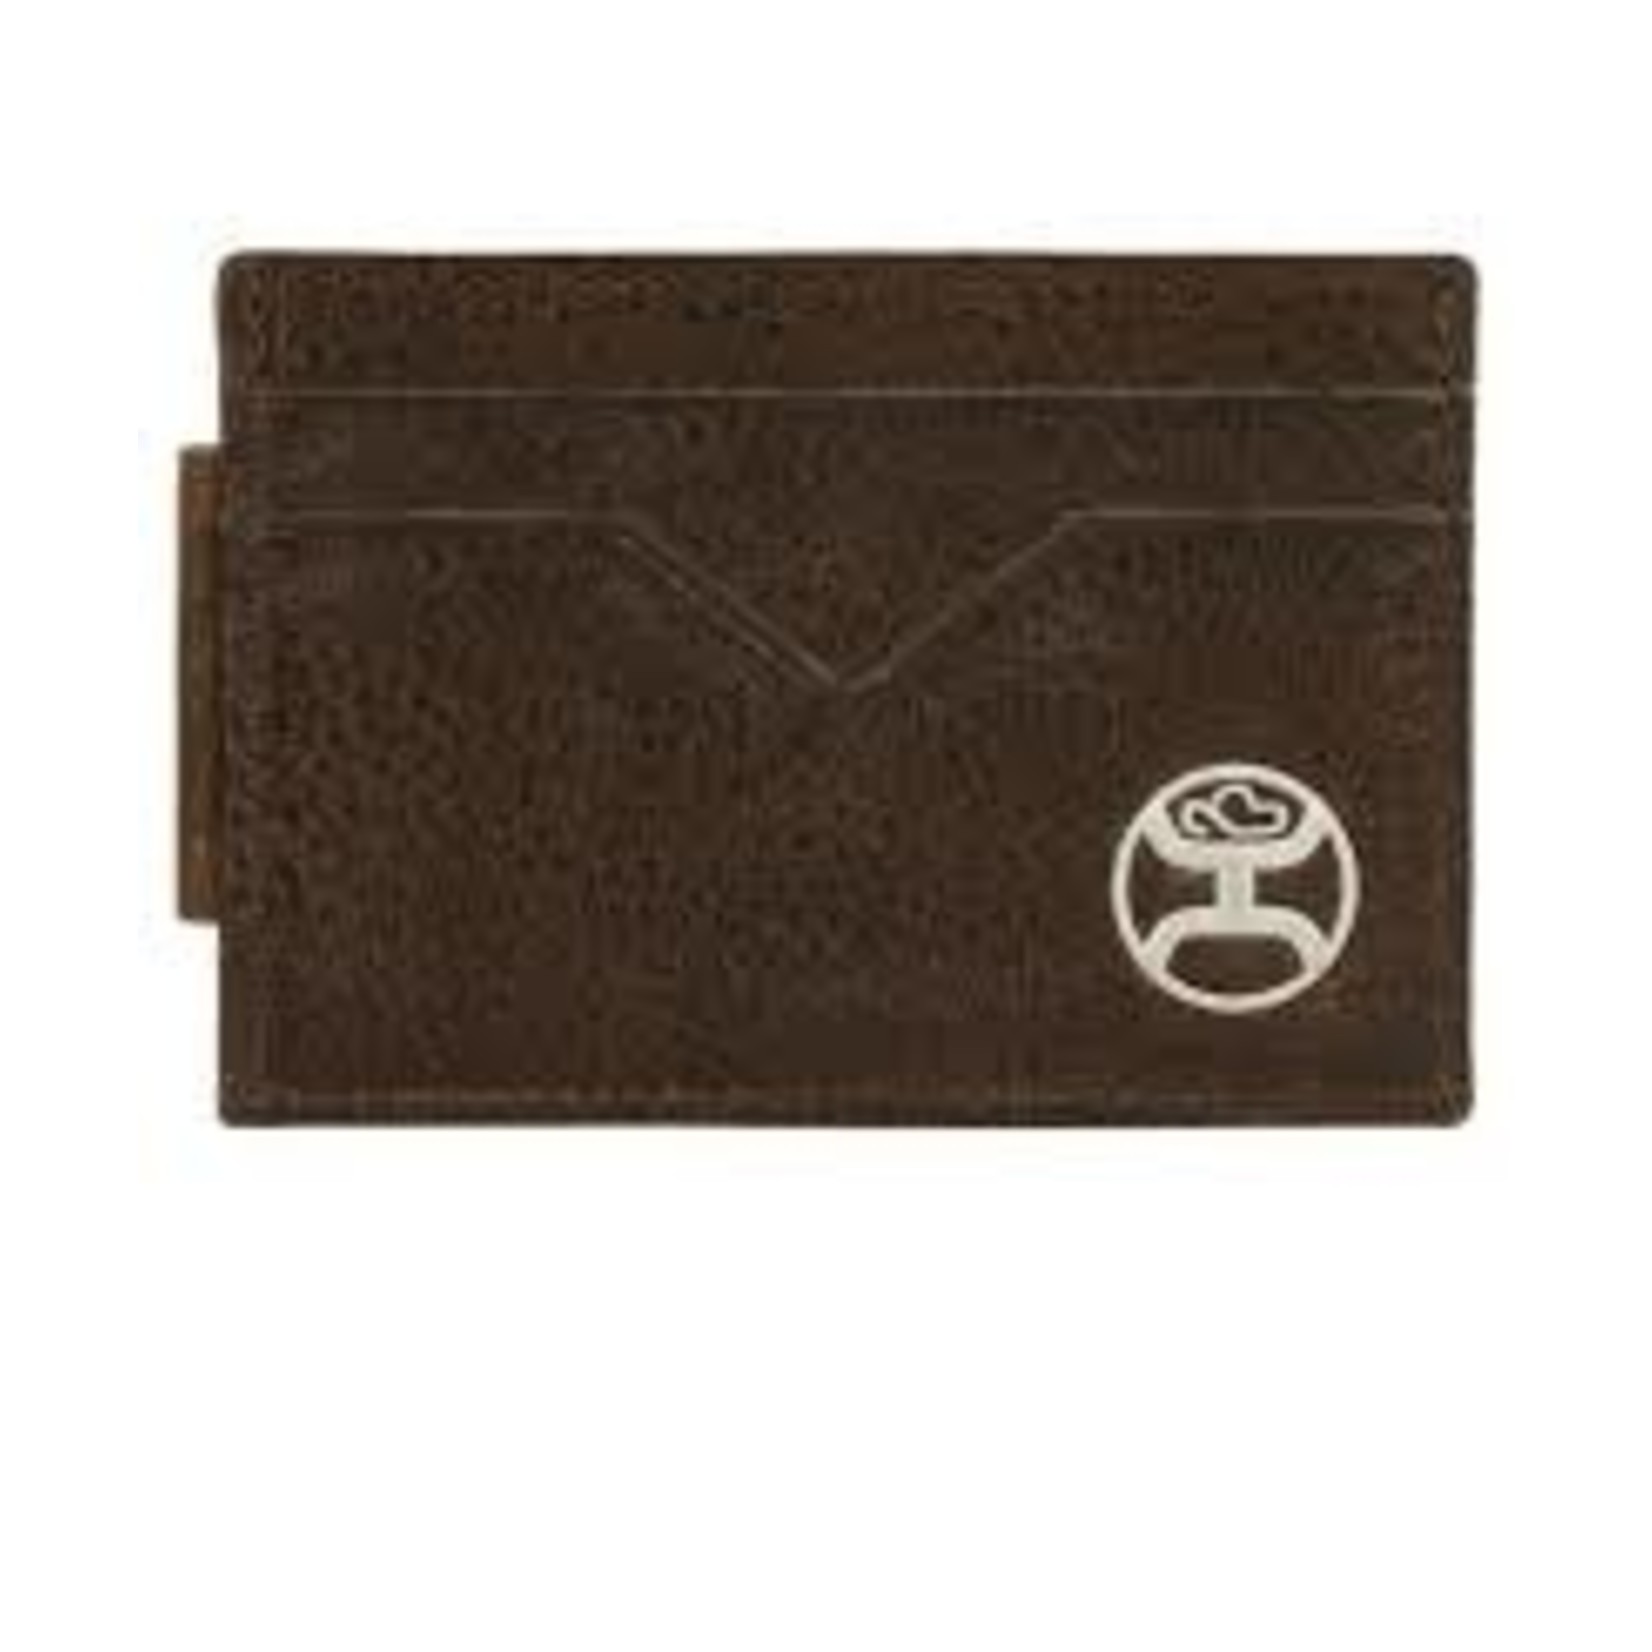 Trenditions Trenditions 2041662M2 HOOEY CARD  WALLET chocolate & dtitching